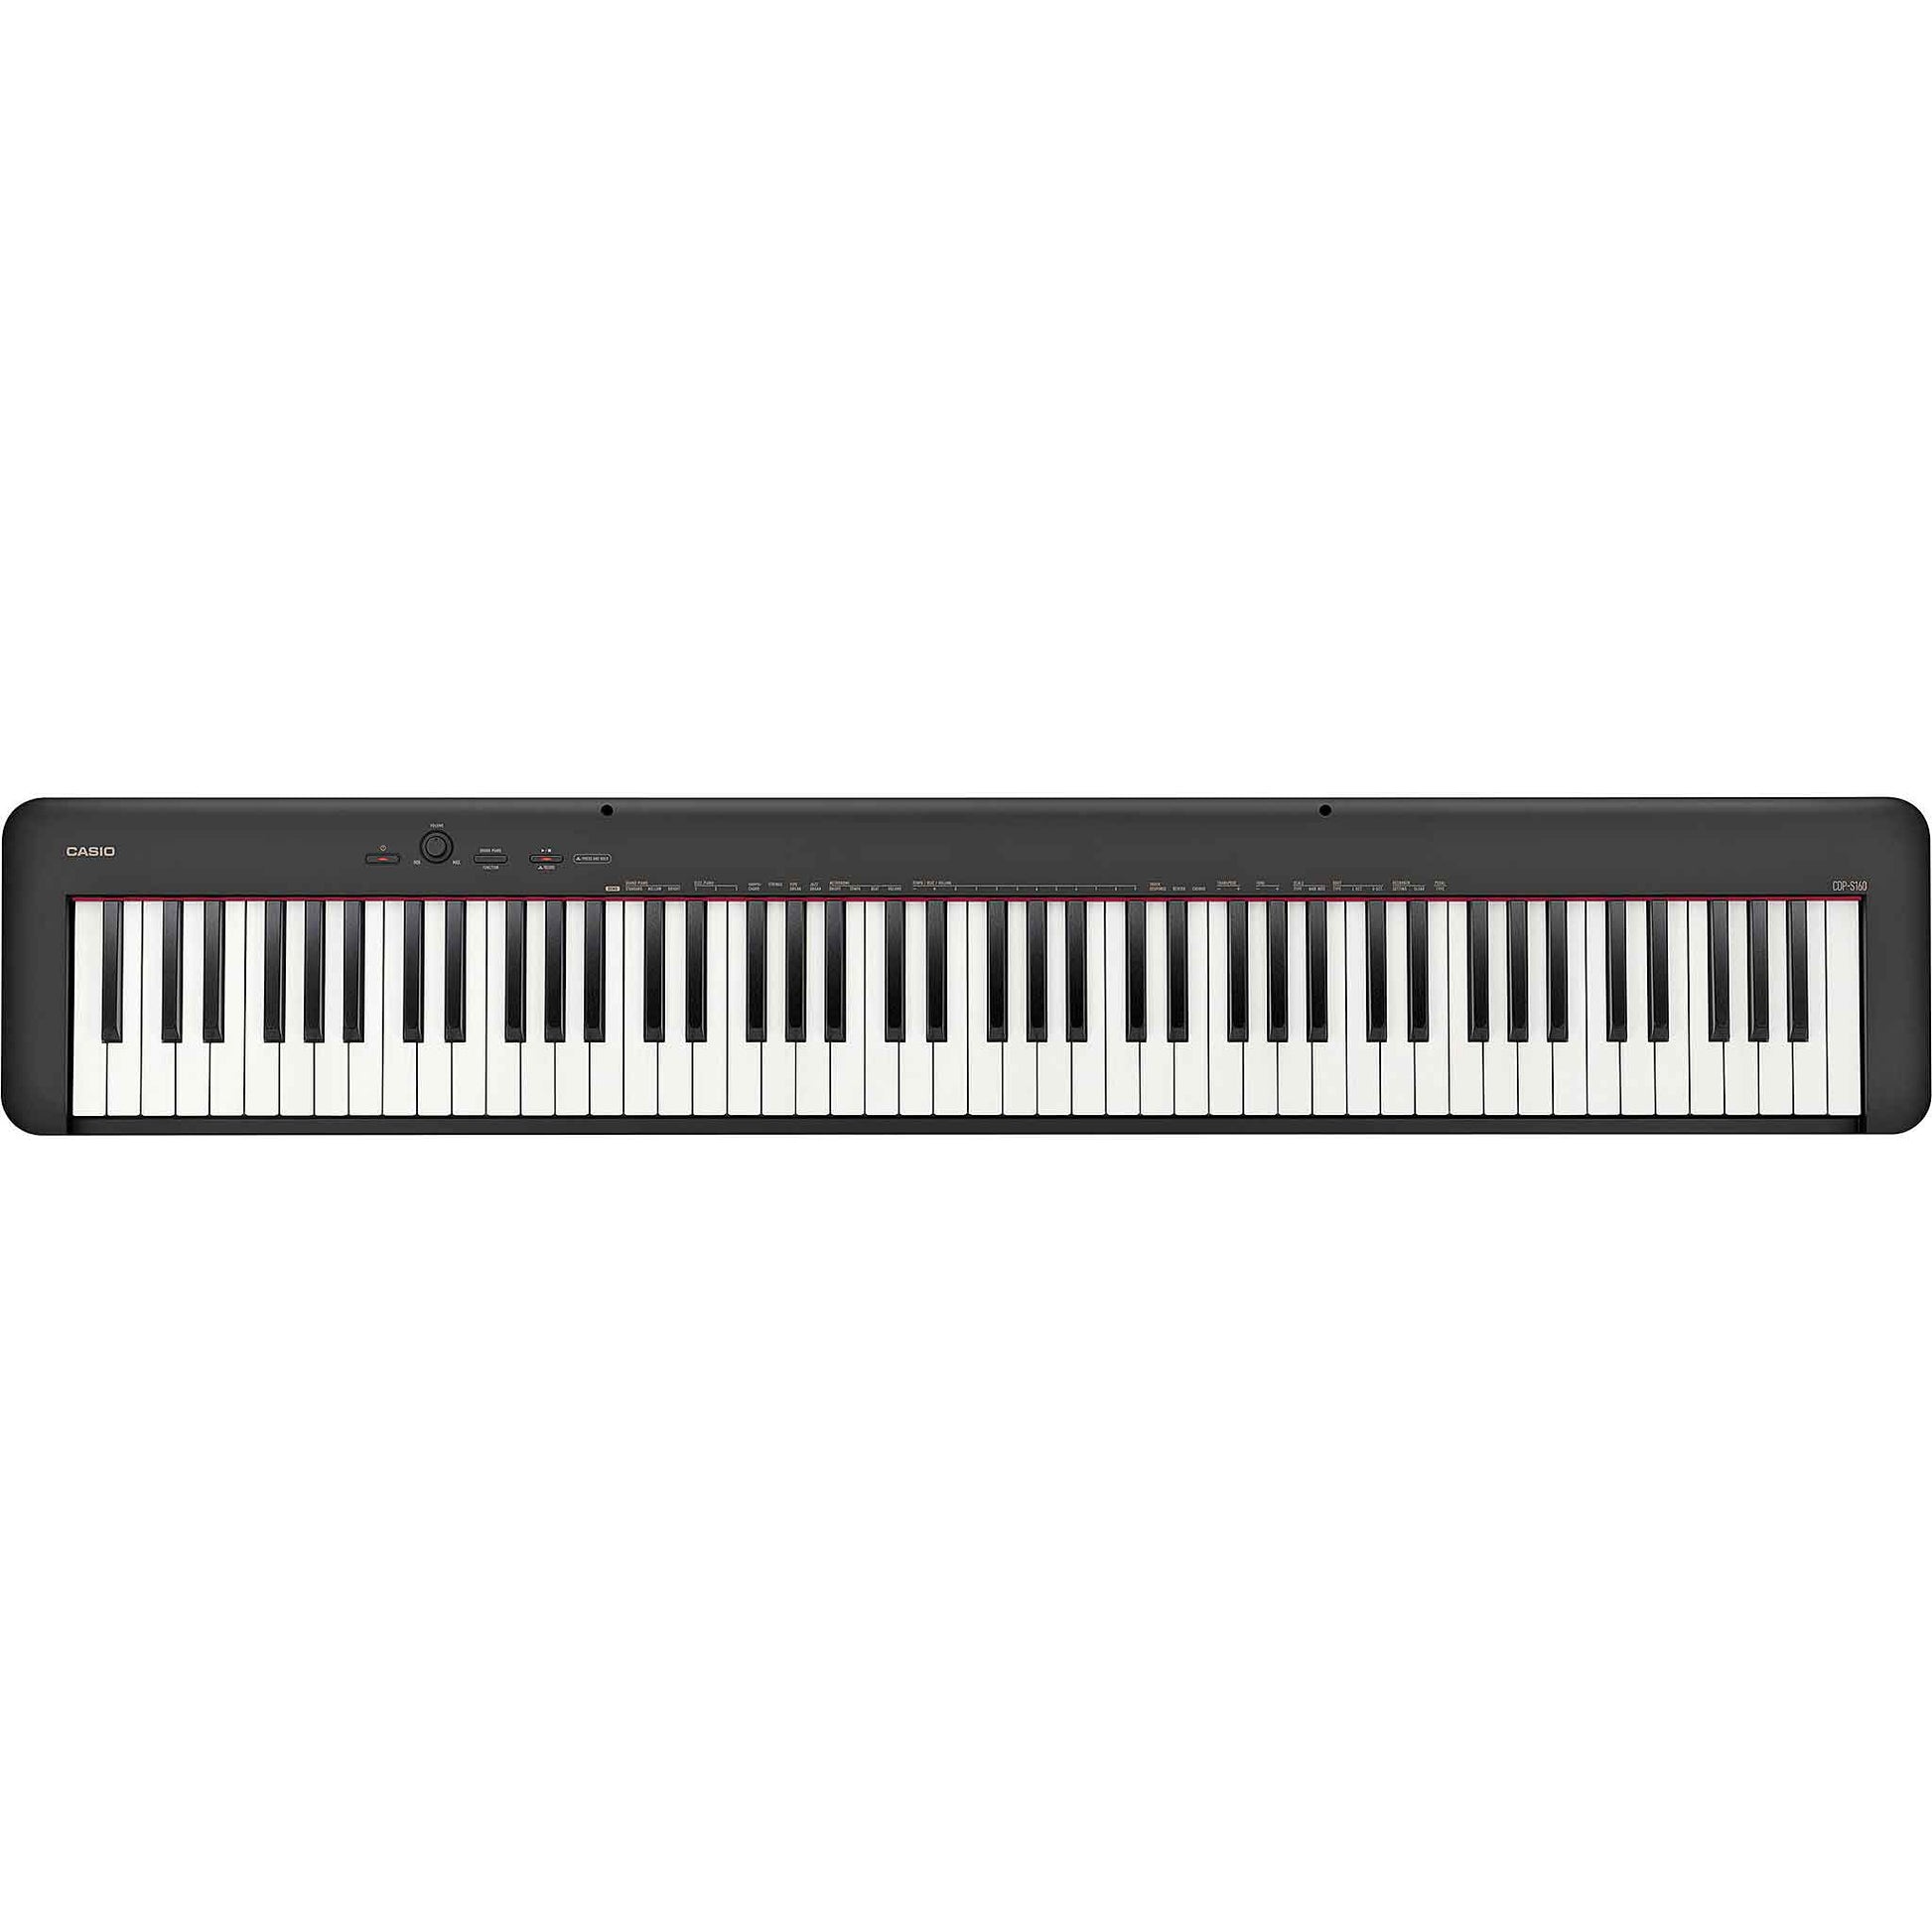 Casio CDP-S160 Digital Piano-Andy's Music